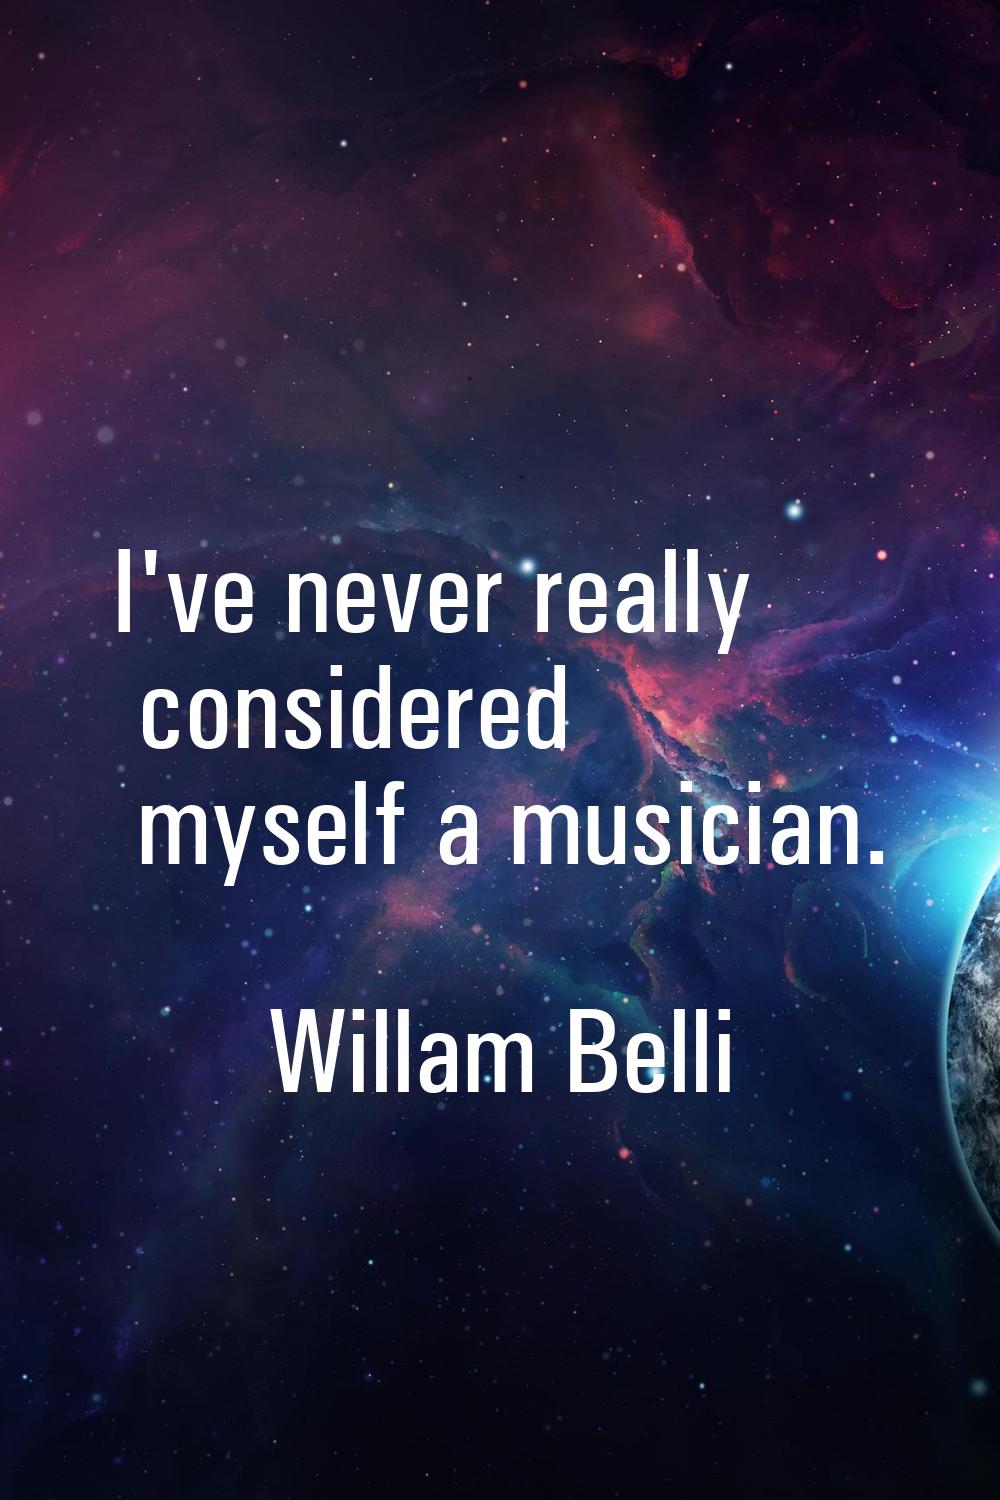 I've never really considered myself a musician.